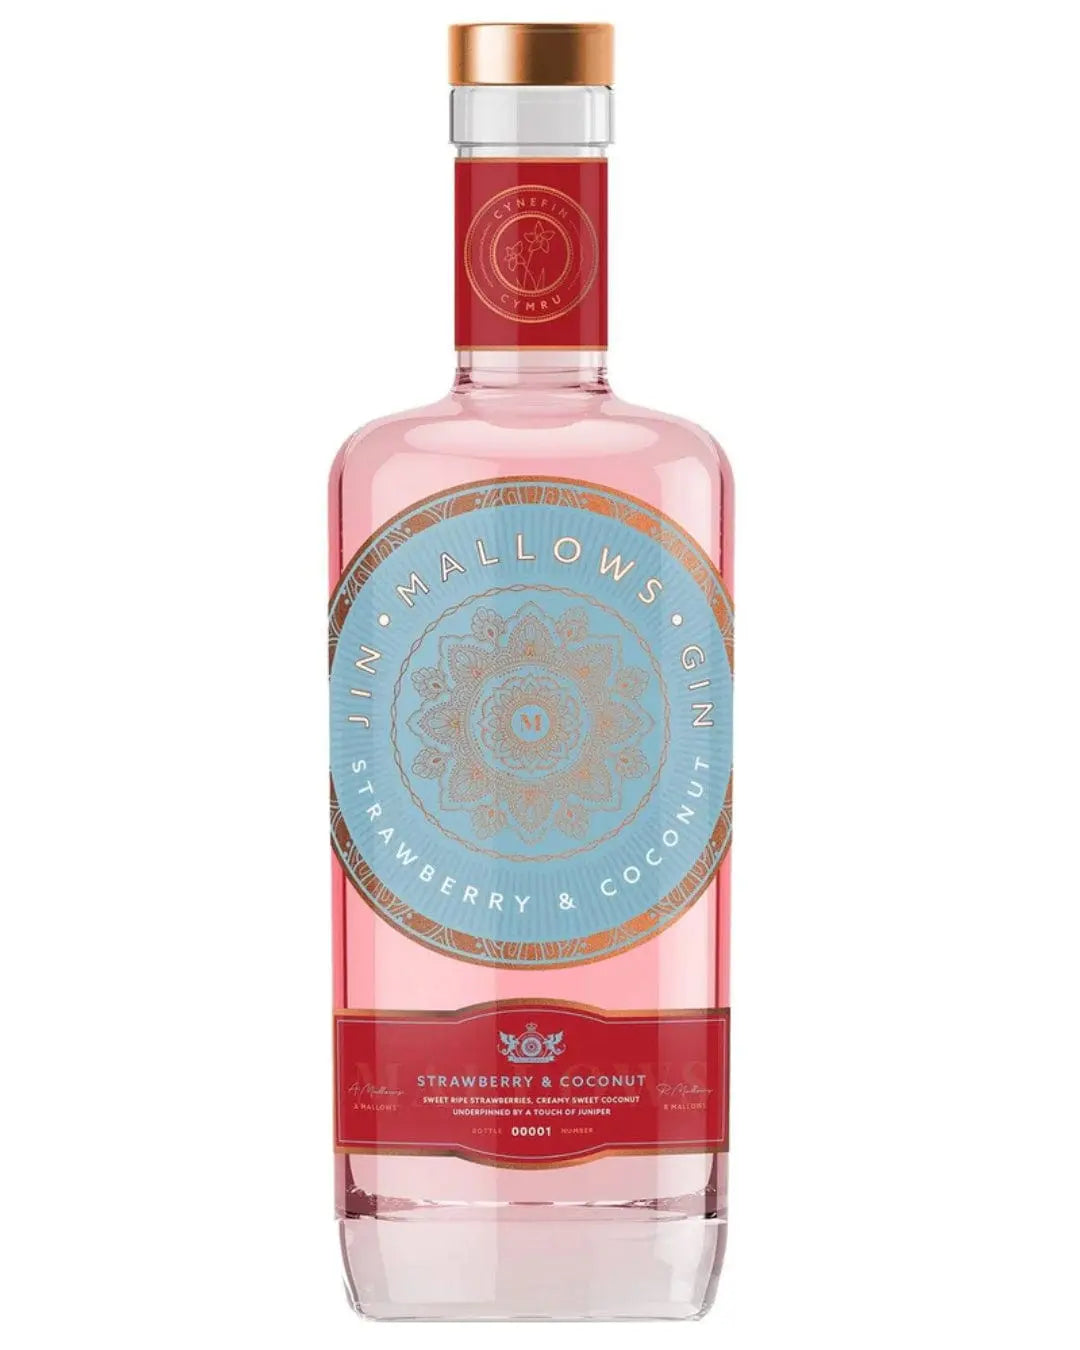 Mallows Strawberry & Coconut Gin, 70 cl Gin